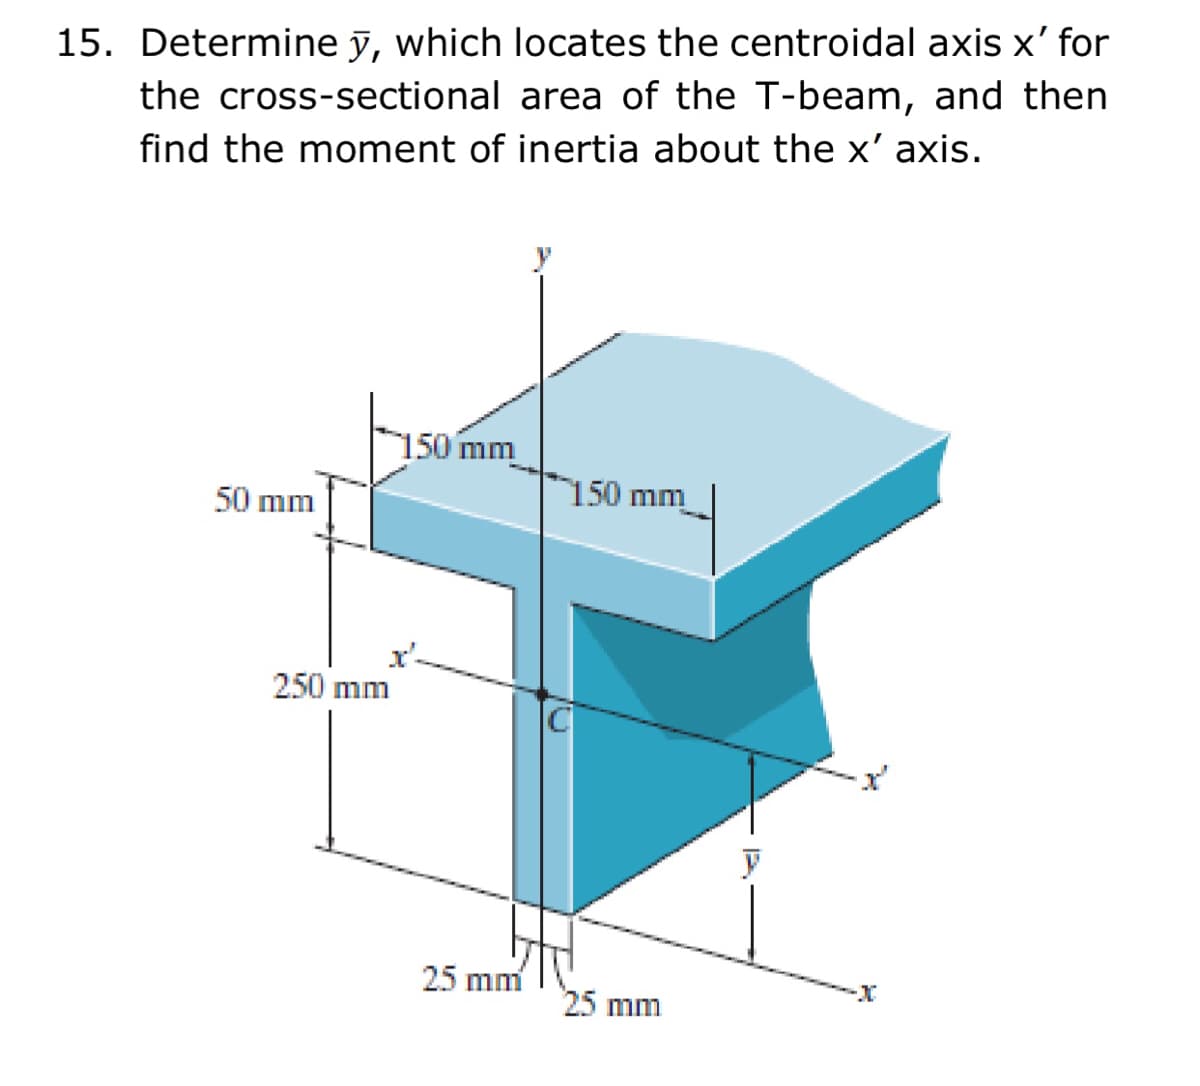 15. Determine y, which locates the centroidal axis x' for
the cross-sectional area of the T-beam, and then
find the moment of inertia about the x' axis.
150 mm
150 mm
50 mm
x'-
250 mm
25 mm
25 mm
